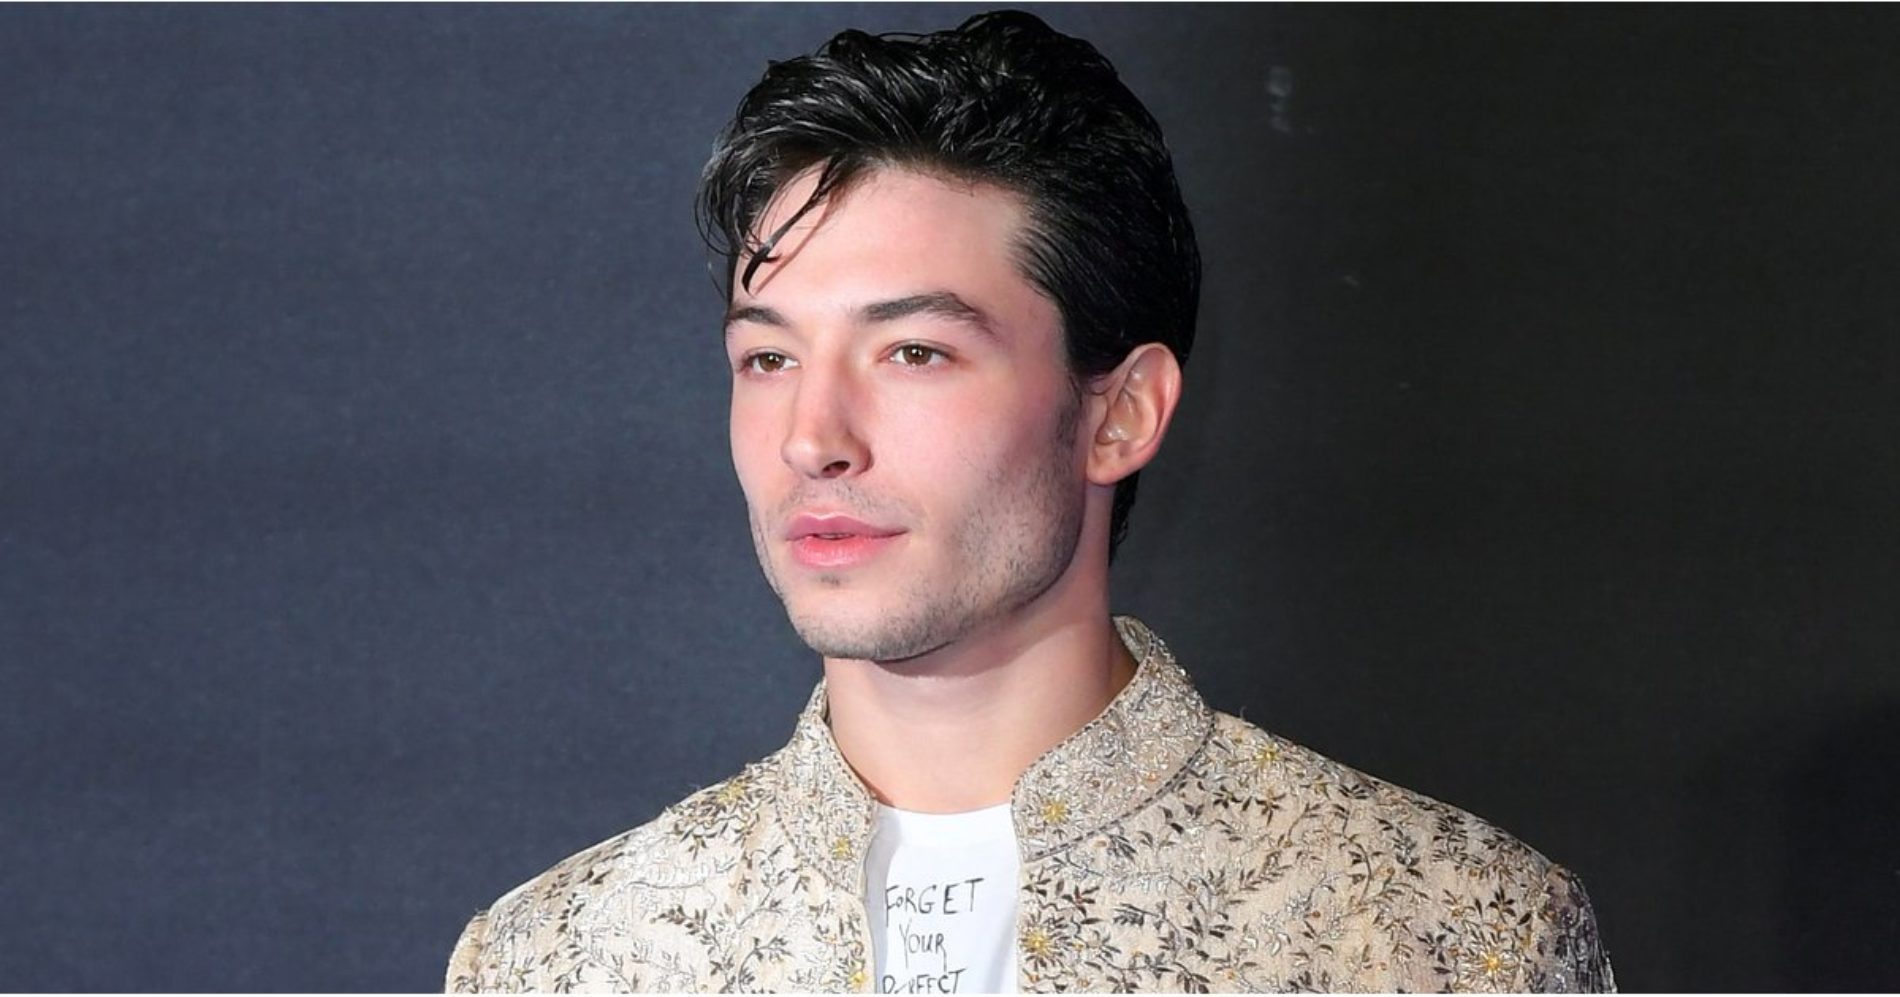 Ezra Miller on coming out: “I was told by a lot of people I’d made a mistake.”